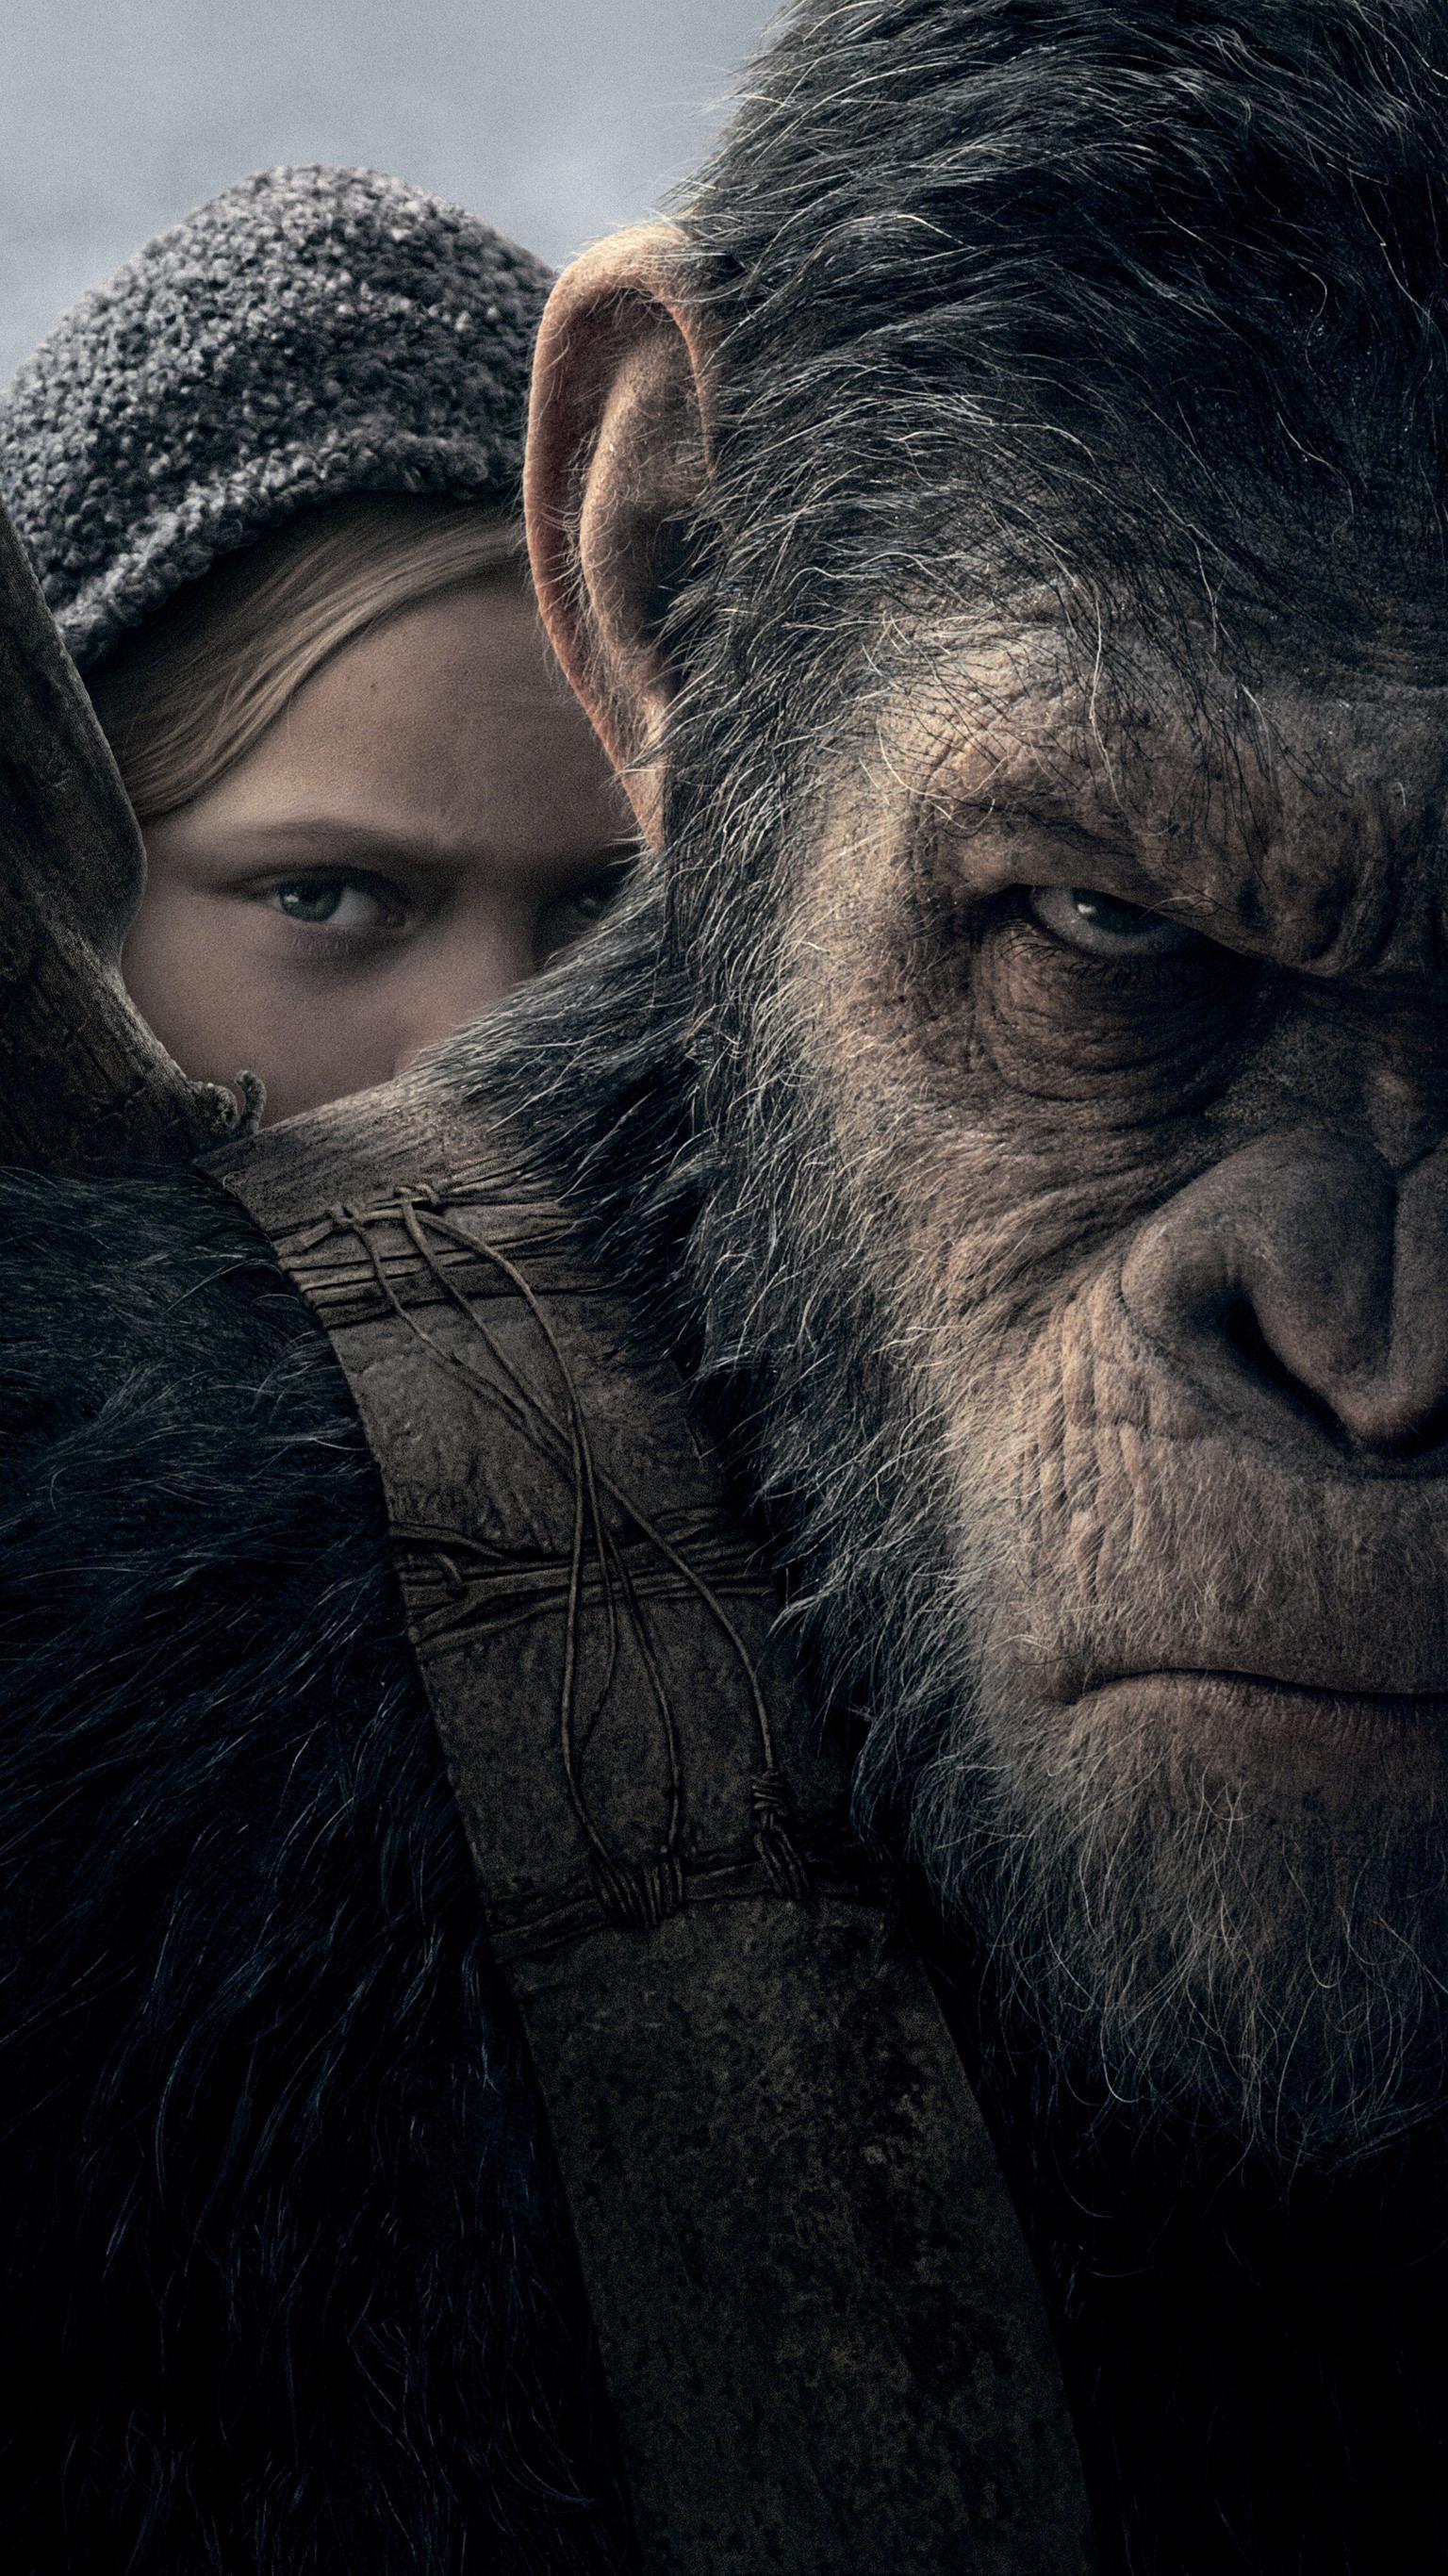 War for the Planet of the Apes (2017) Phone Wallpaper in 2020